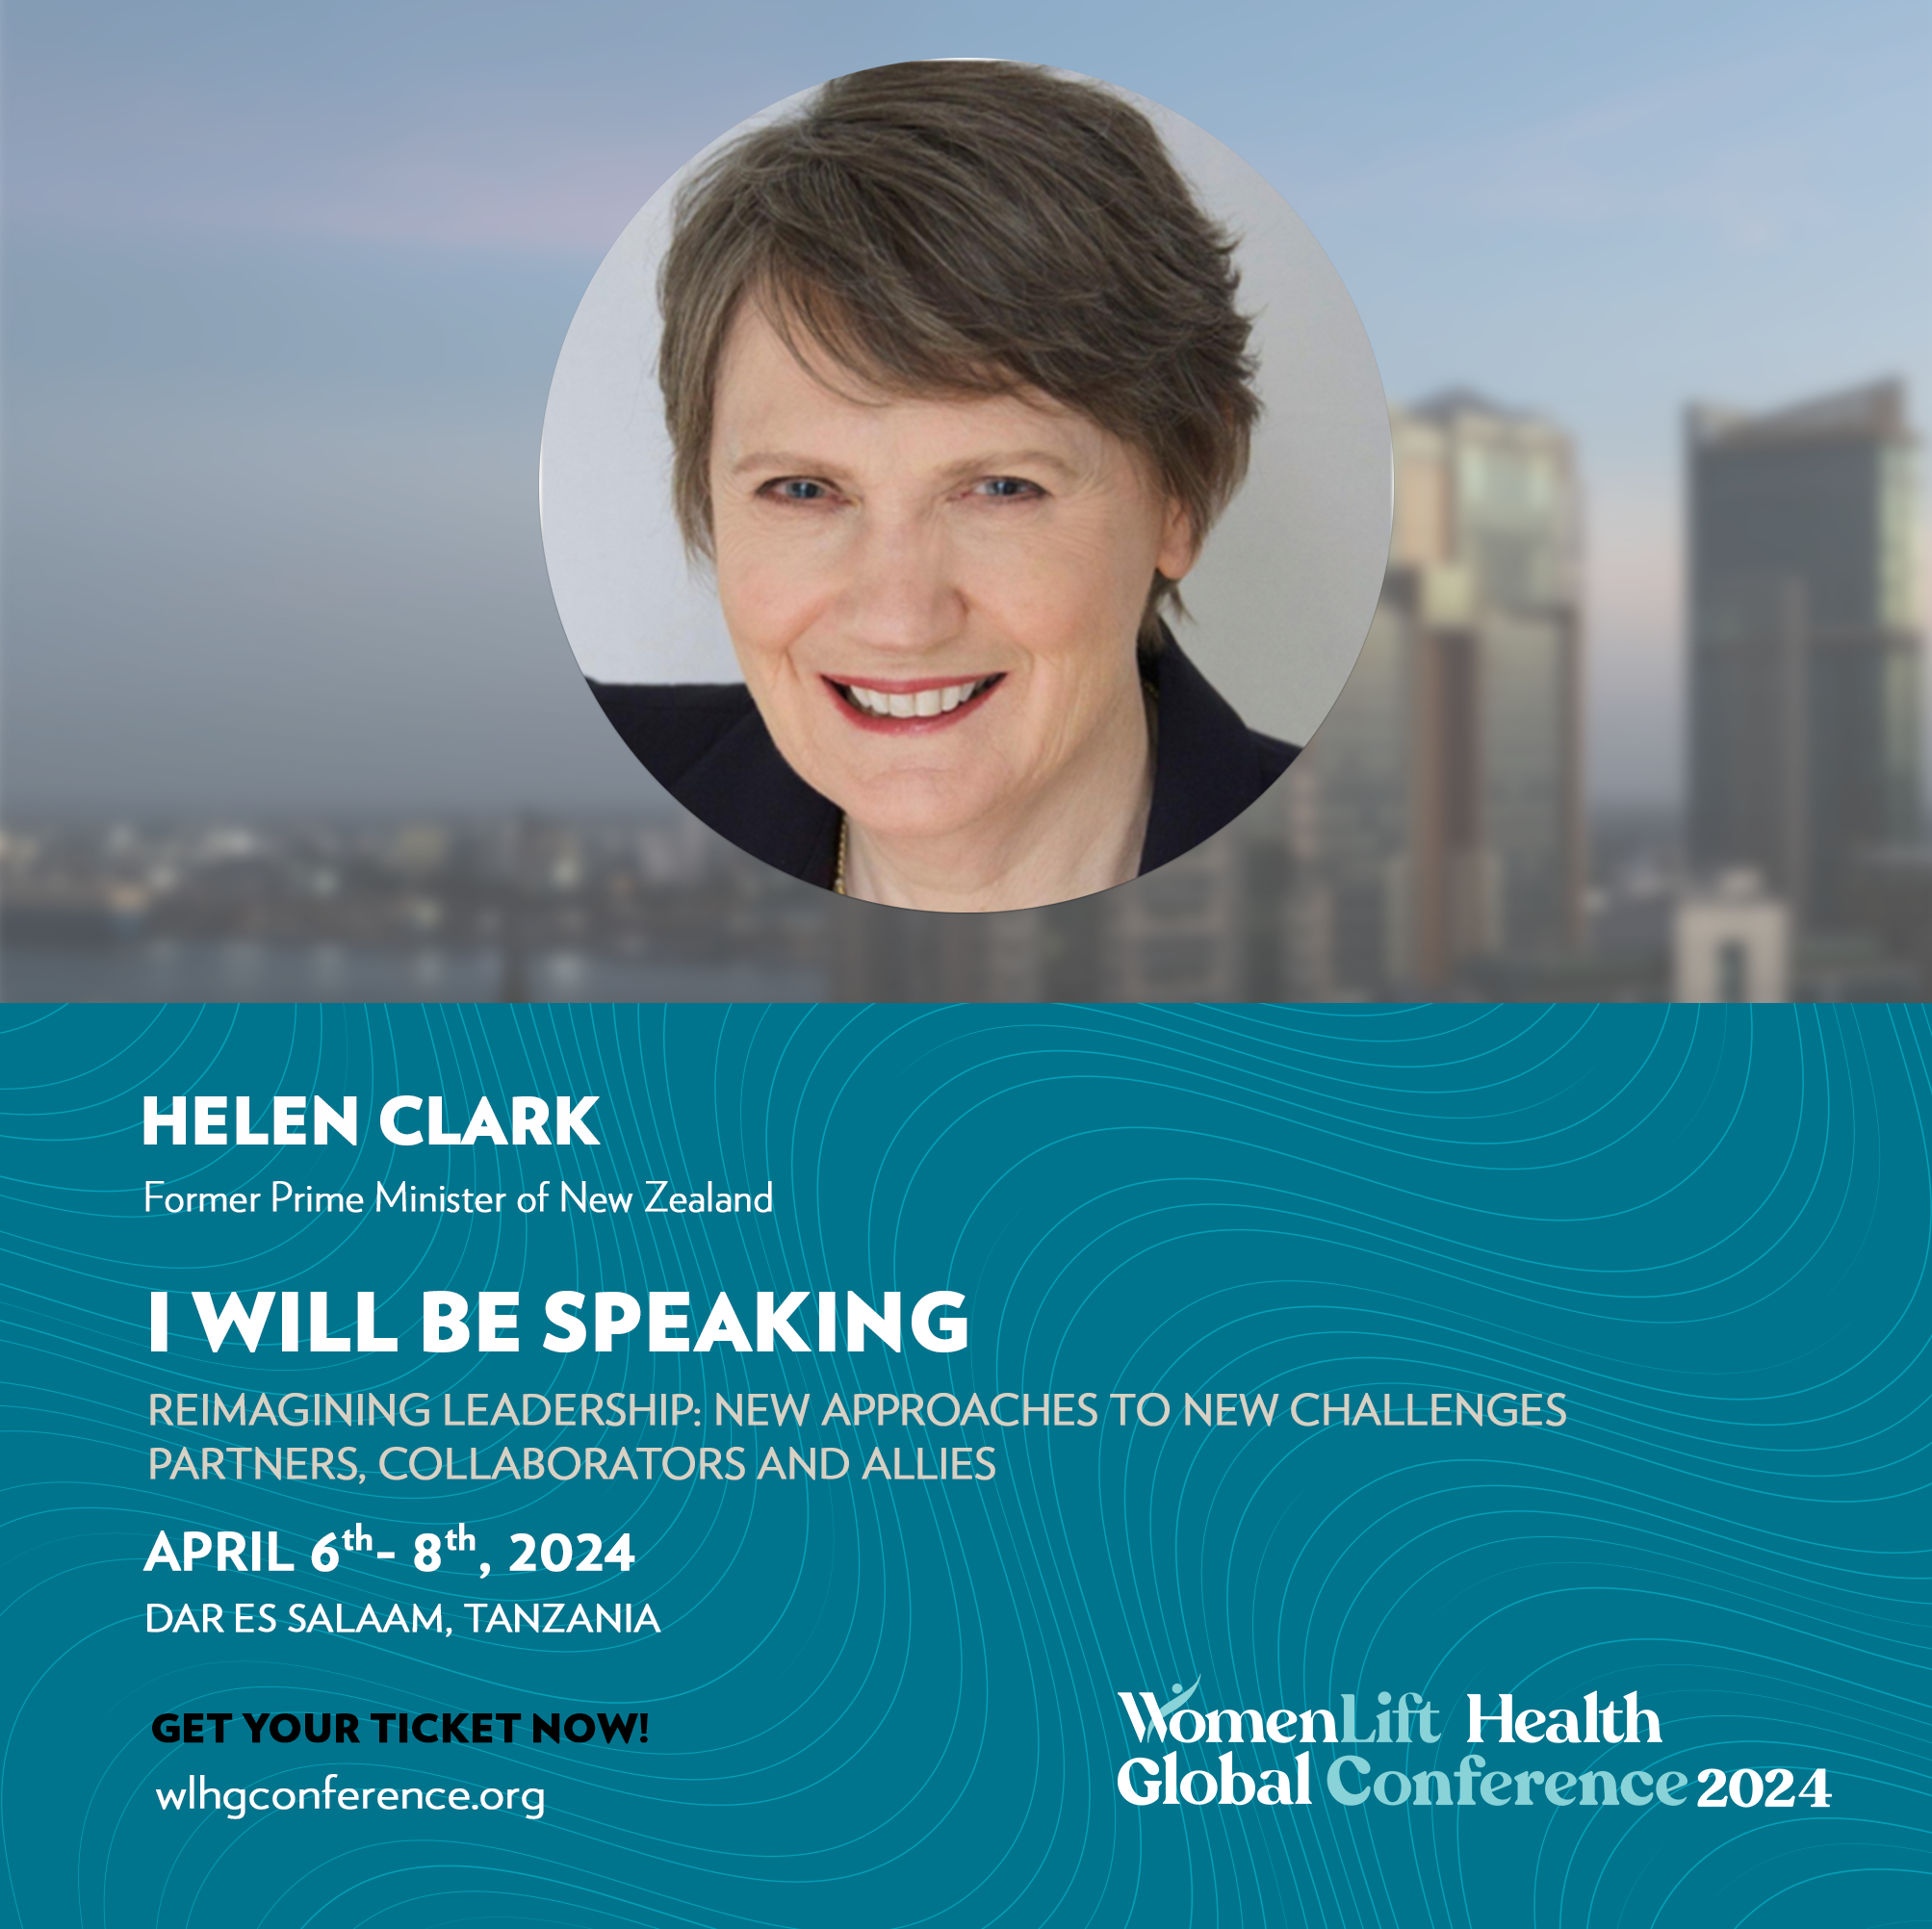 Rt Hon Helen Clark will be speaking at the WomenLift Health Global Conference 2024